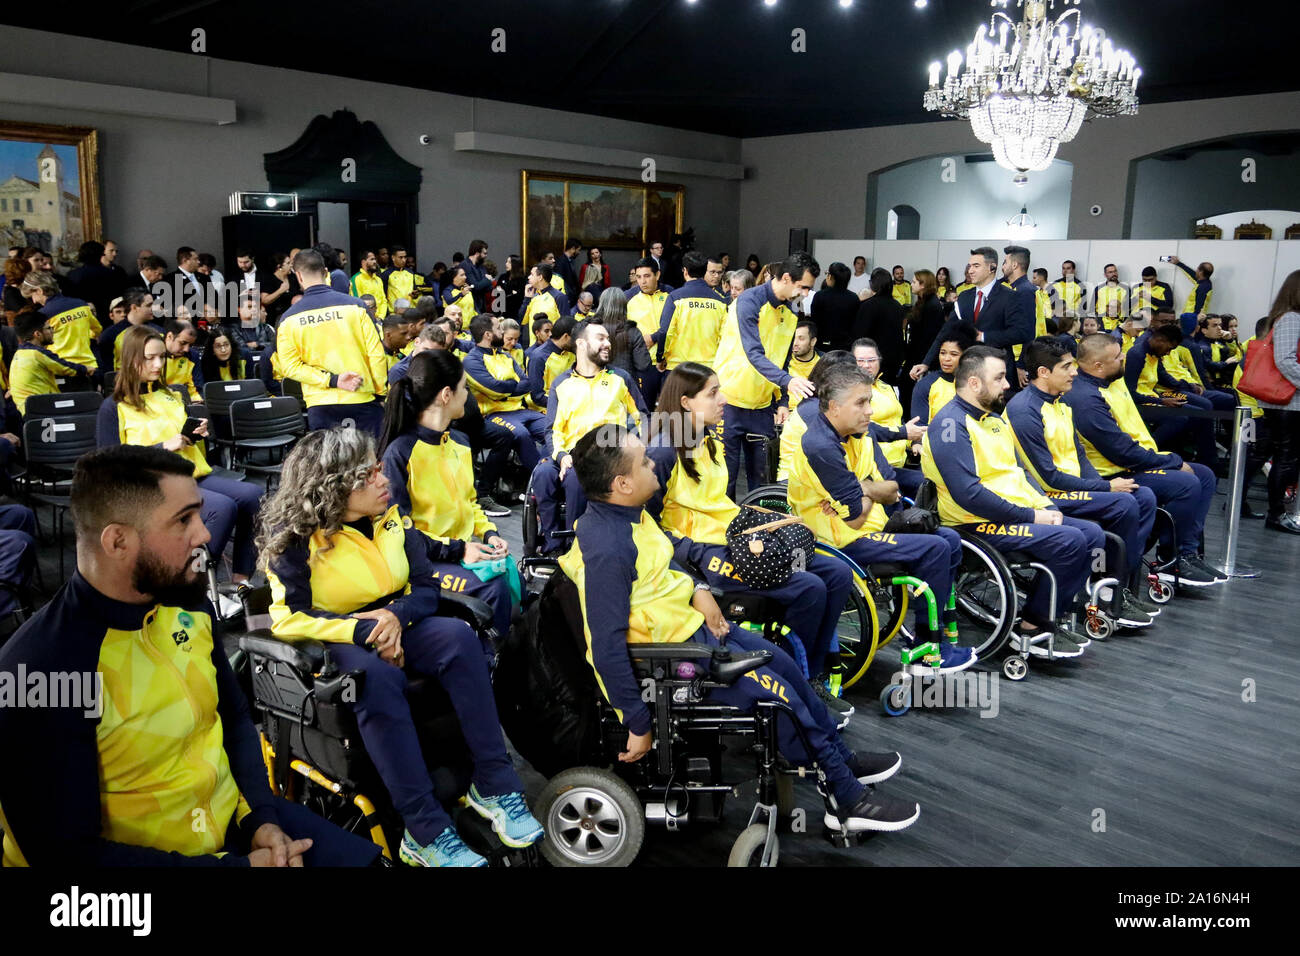 SÃO PAULO, SP - 24.09.2019: DORIA HOMENAGEIA ATLETAS PARALÍMPICOS - The government of the State of Sao Paulo, delivers the sporting merit medal and diploma to the Paralympic athletes of the Sao Paulo team, who participated in the 2019 Parapan American Games in Lima, Peru. (Photo: Aloisio Mauricio/Fotoarena) Stock Photo